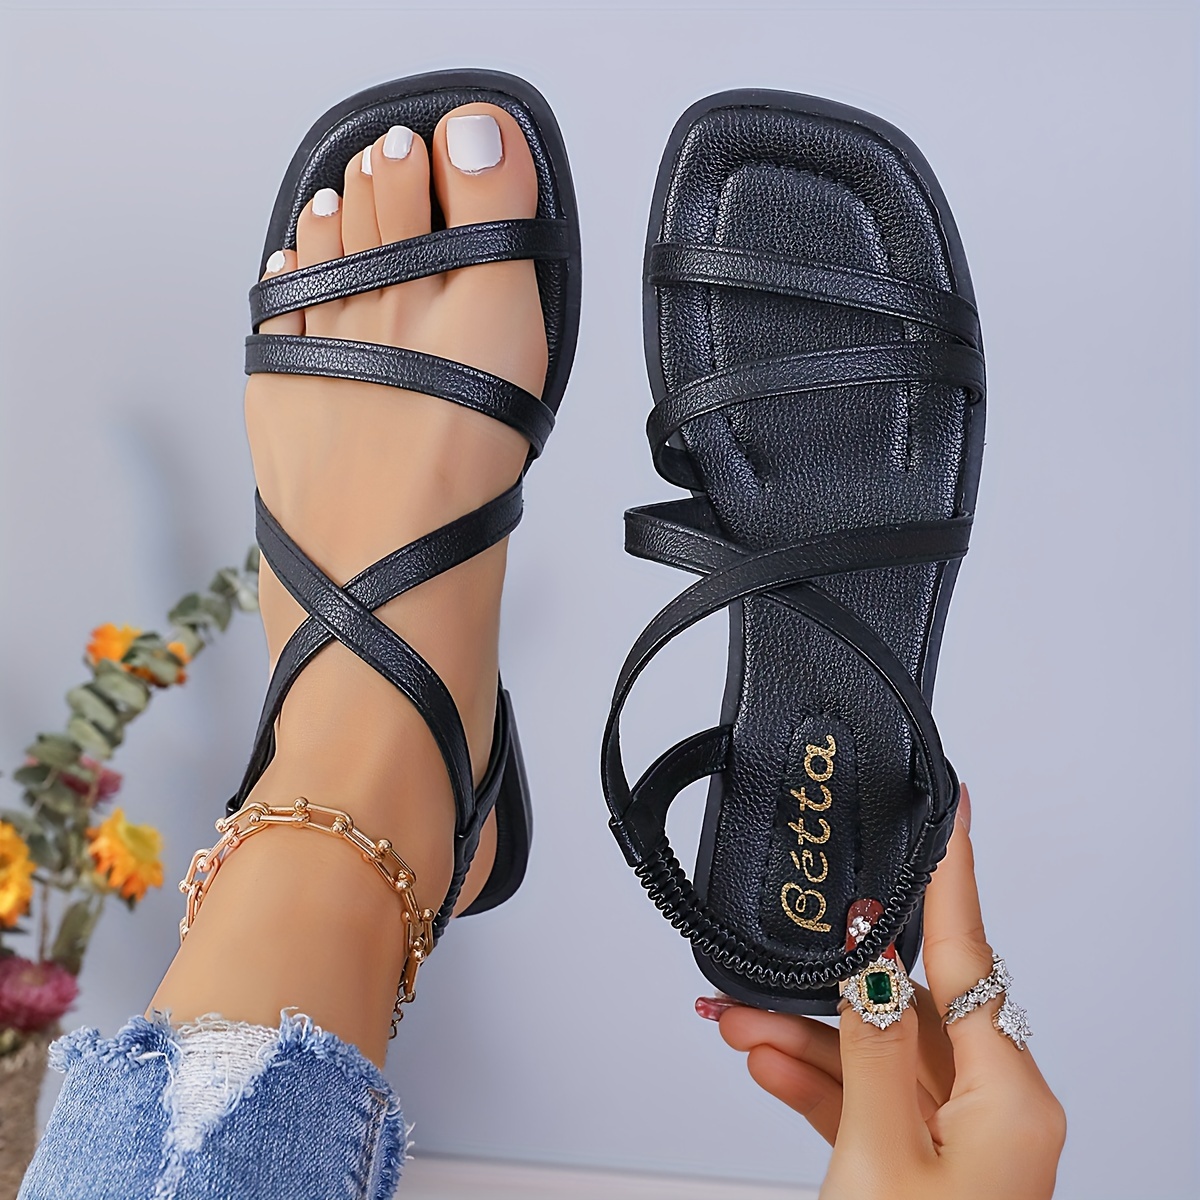 

Women's Solid Color Stylish Sandals, Elastic Ankle Strap Lightweight Flat Seaside Shoes, Slingback Crisscross Bands Beach Shoes